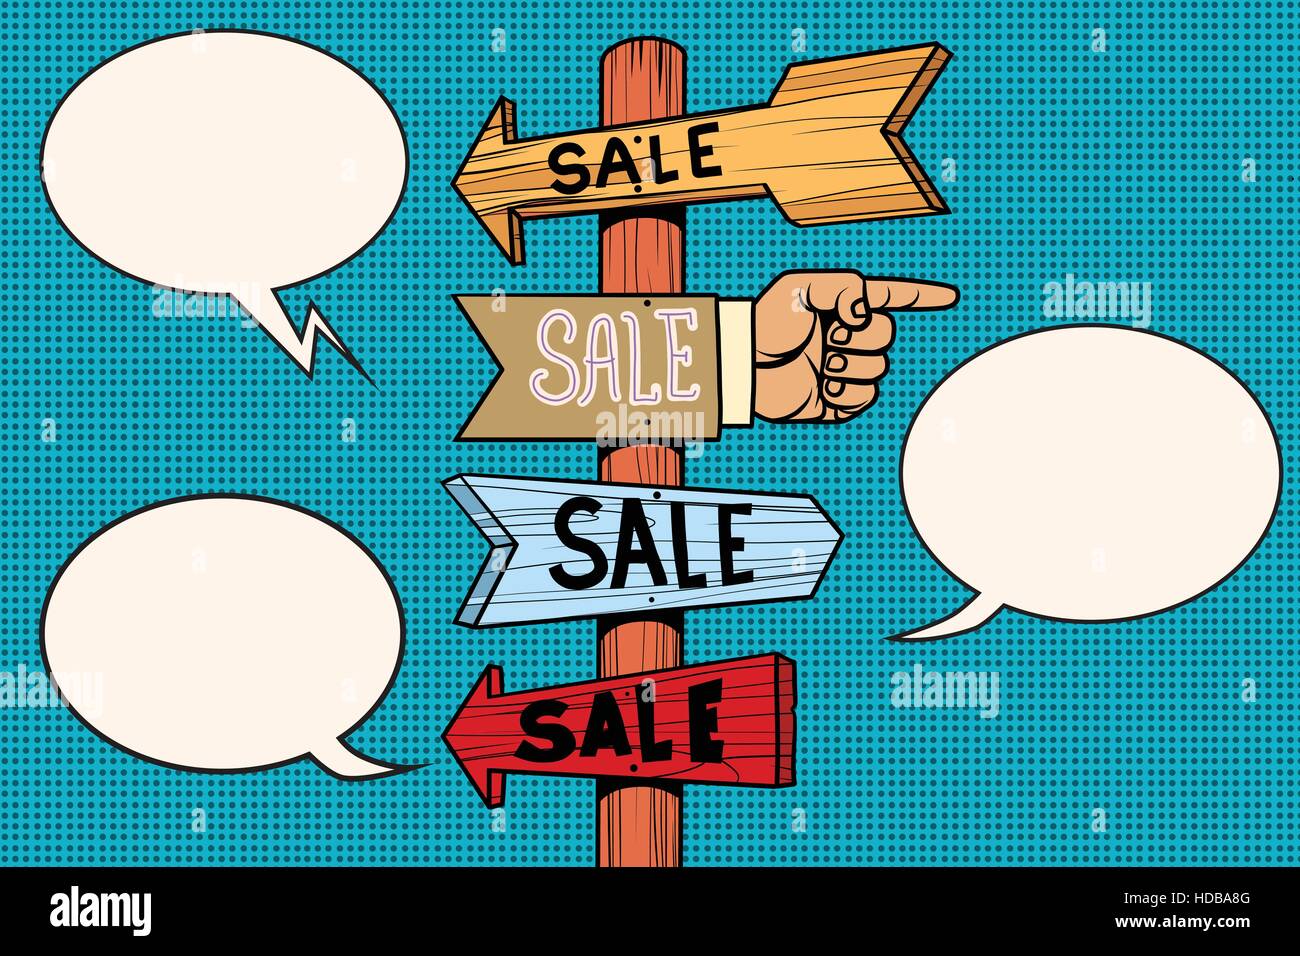 Pointers arrow sale signs navigation Stock Vector